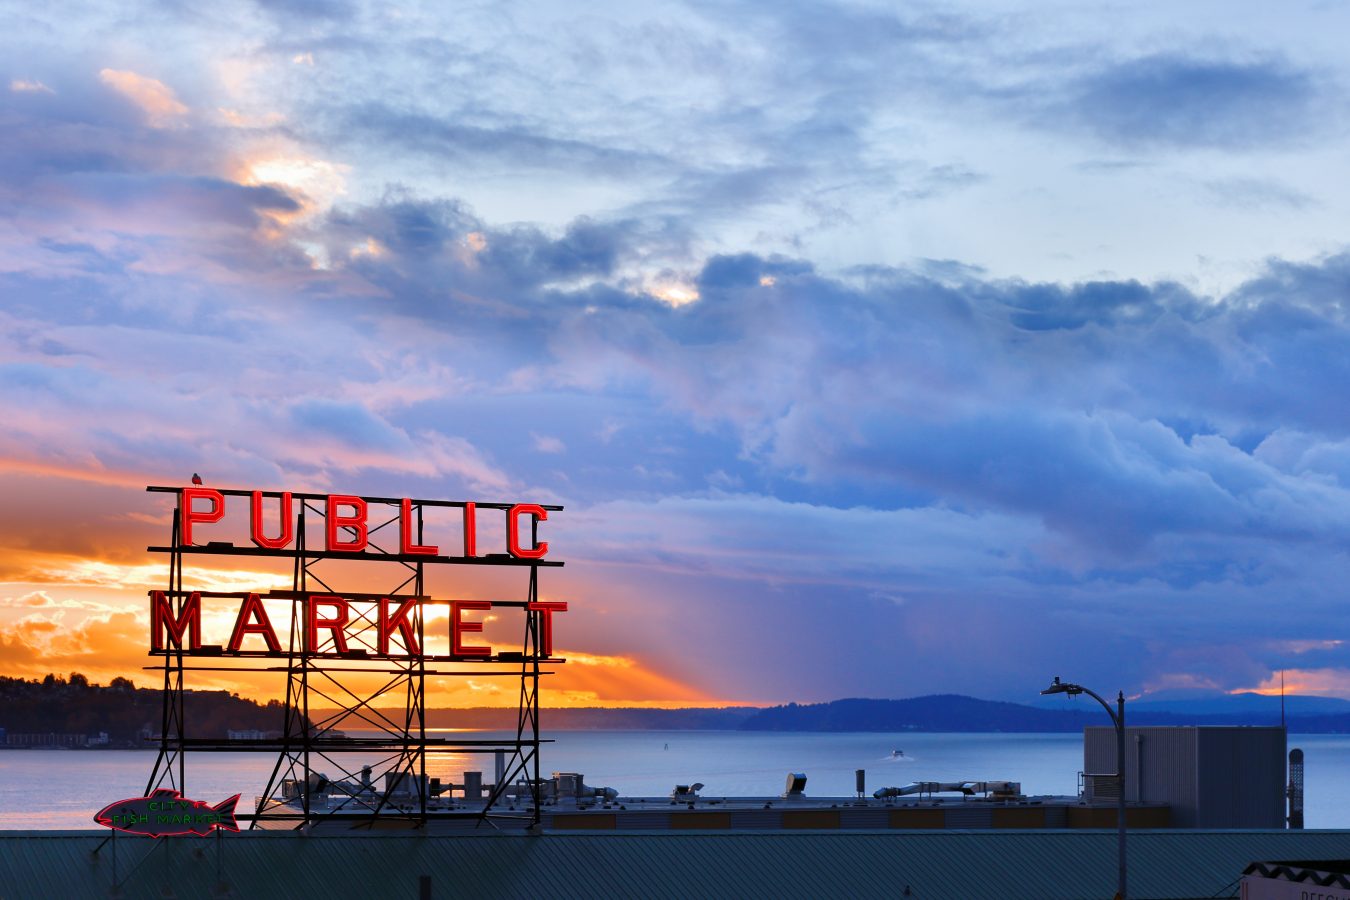 The Pike Place Market in central Seattle, Washington on the  waterfront after sunset.